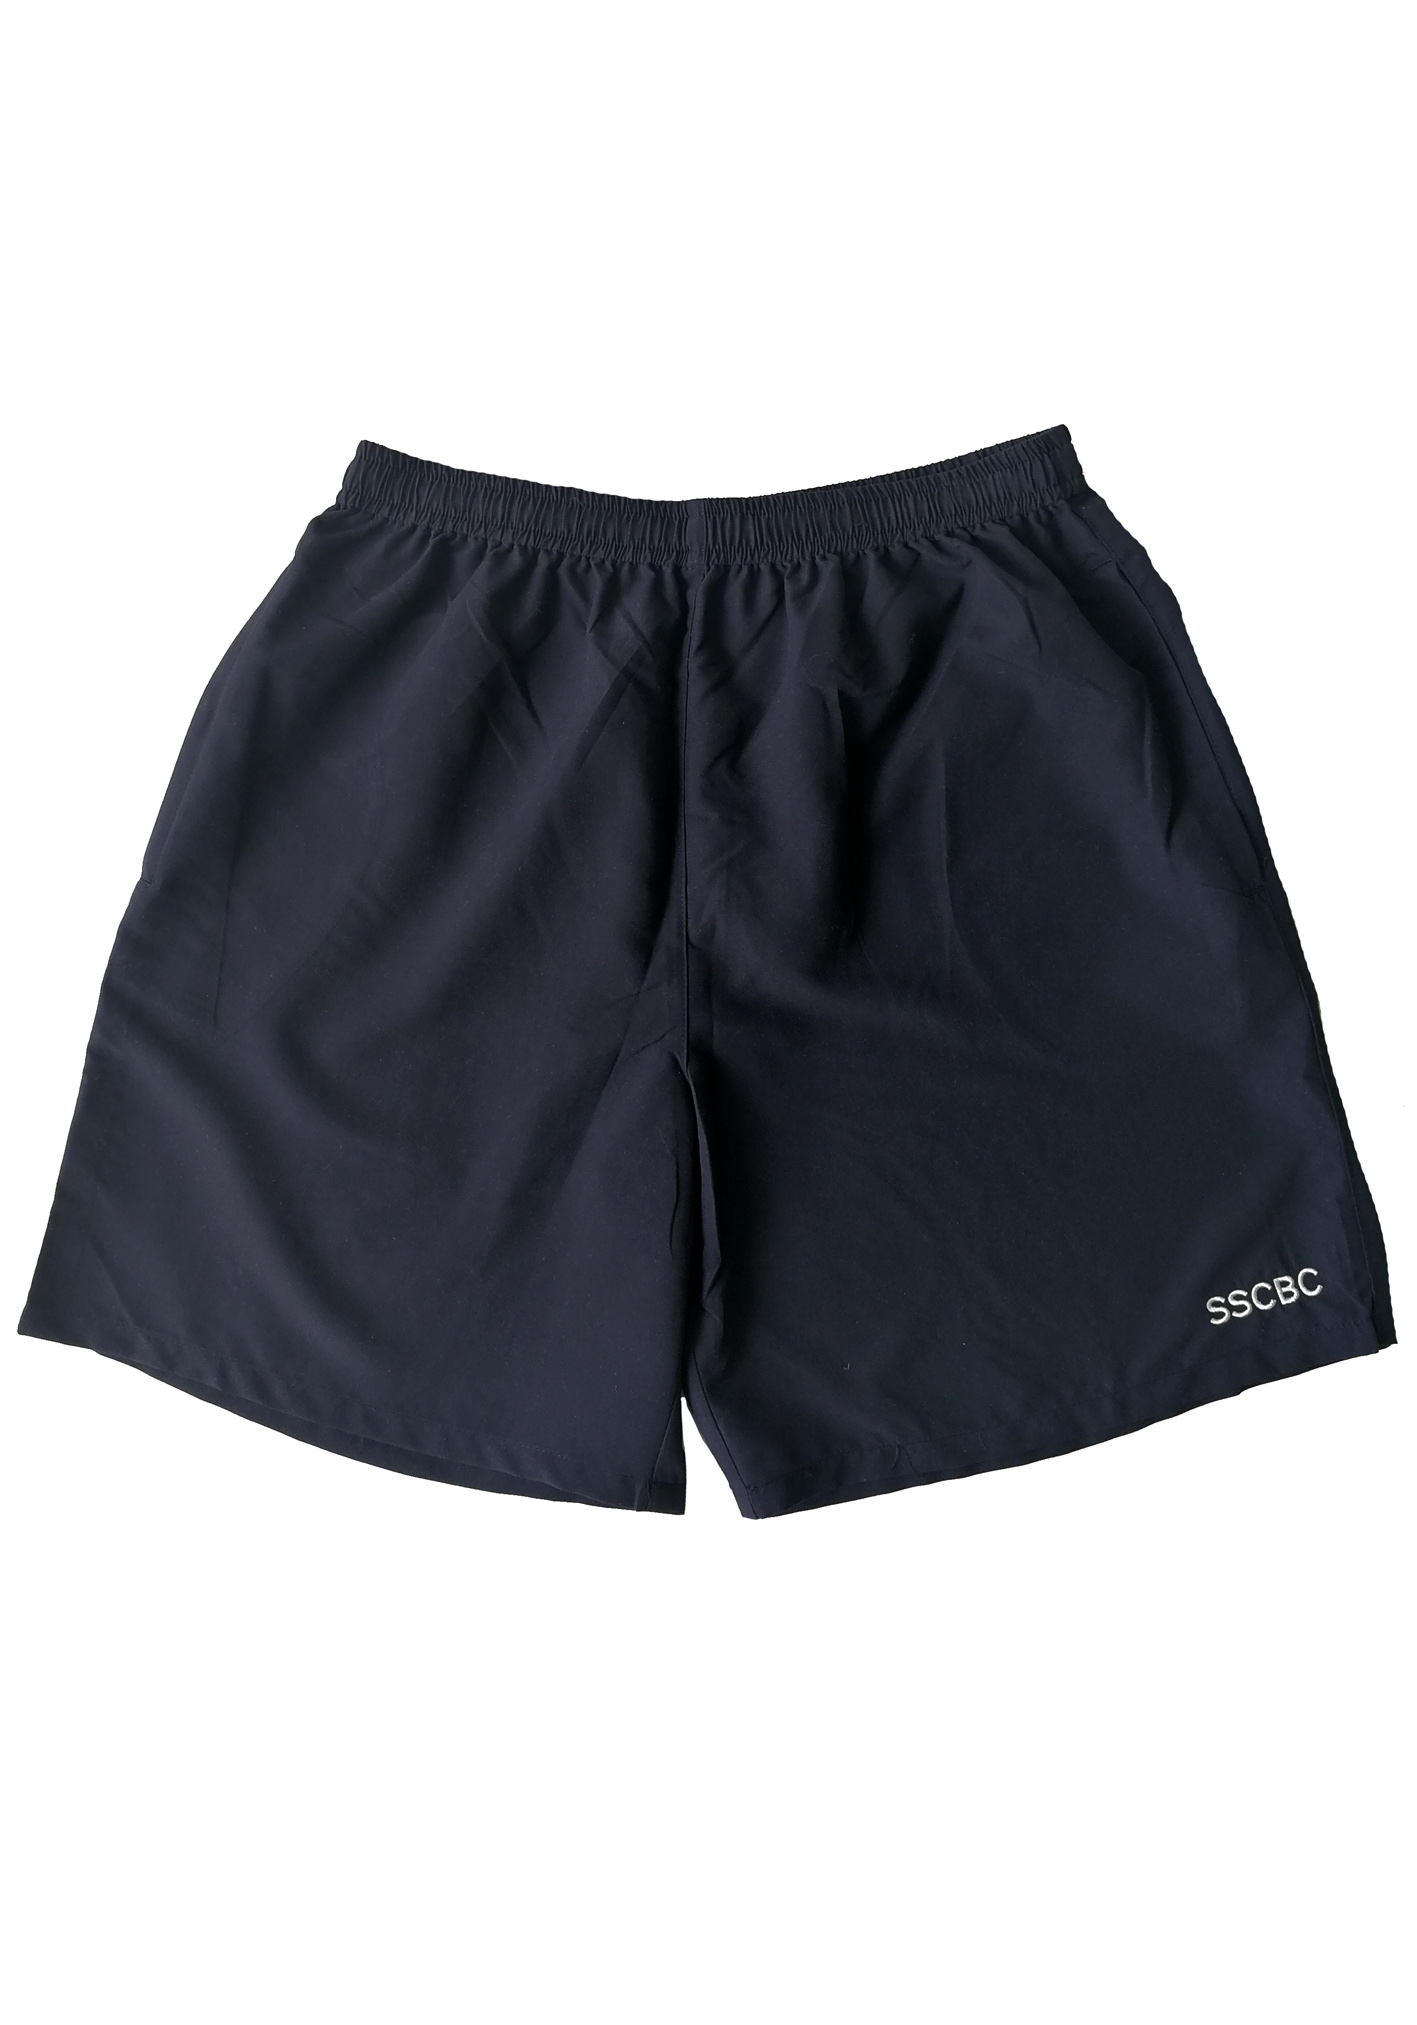 Ssc Balmain Unisex Sports Shorts Navy With Embroidery | Shop at Pickles ...